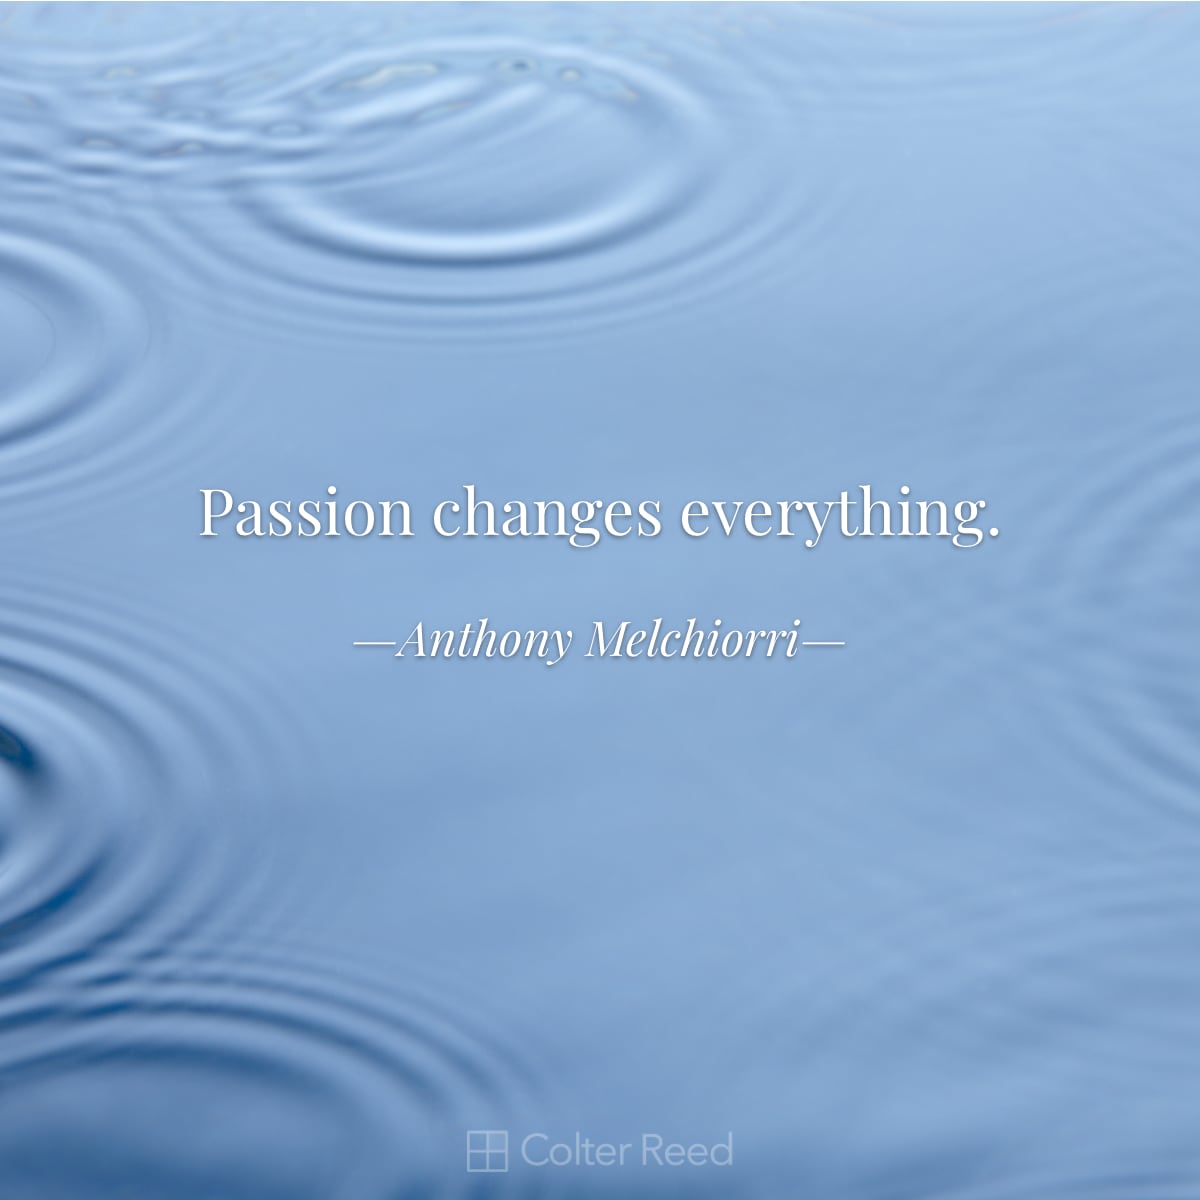 Passion changes everything. —Anthony Melchiorri